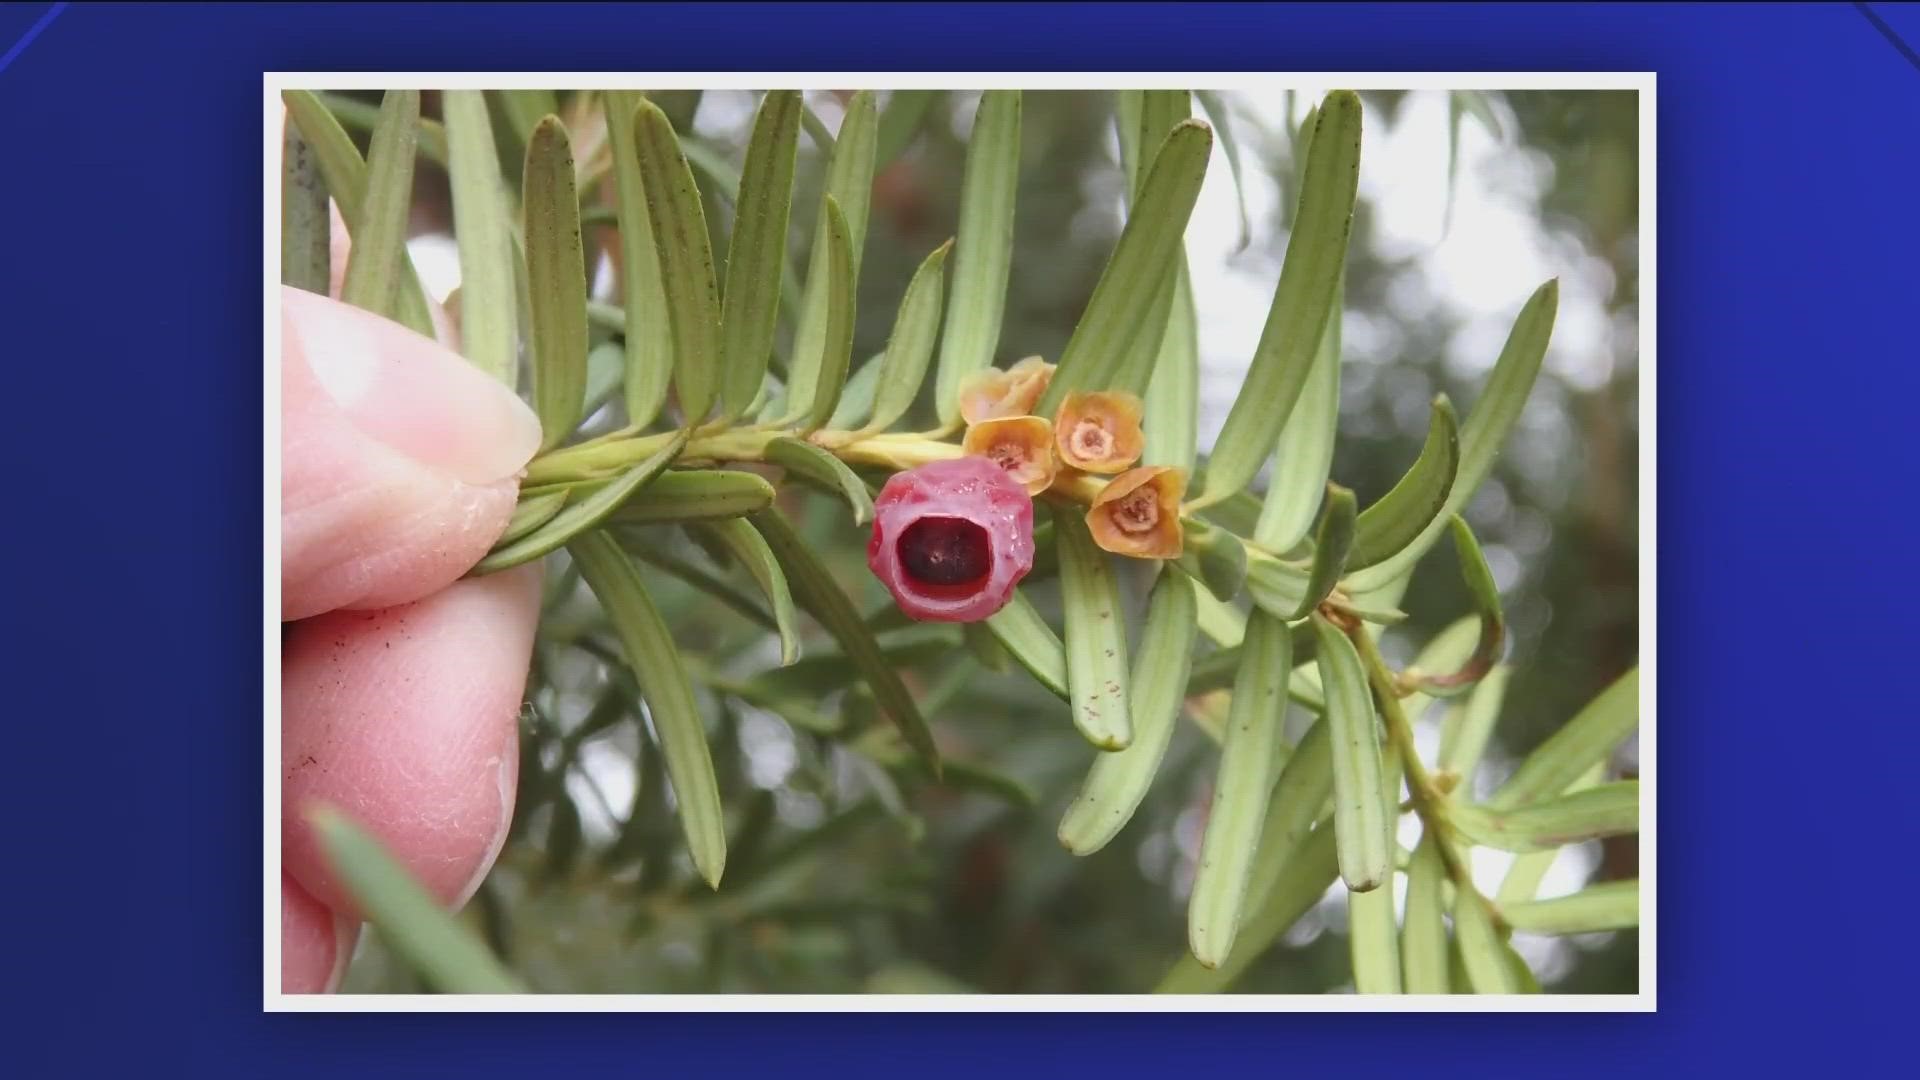 Yew, which is popular as ornamental landscaping, was banned by Blaine County with other noxious plants in 2016. The elk were found dead in the Warm Springs area.